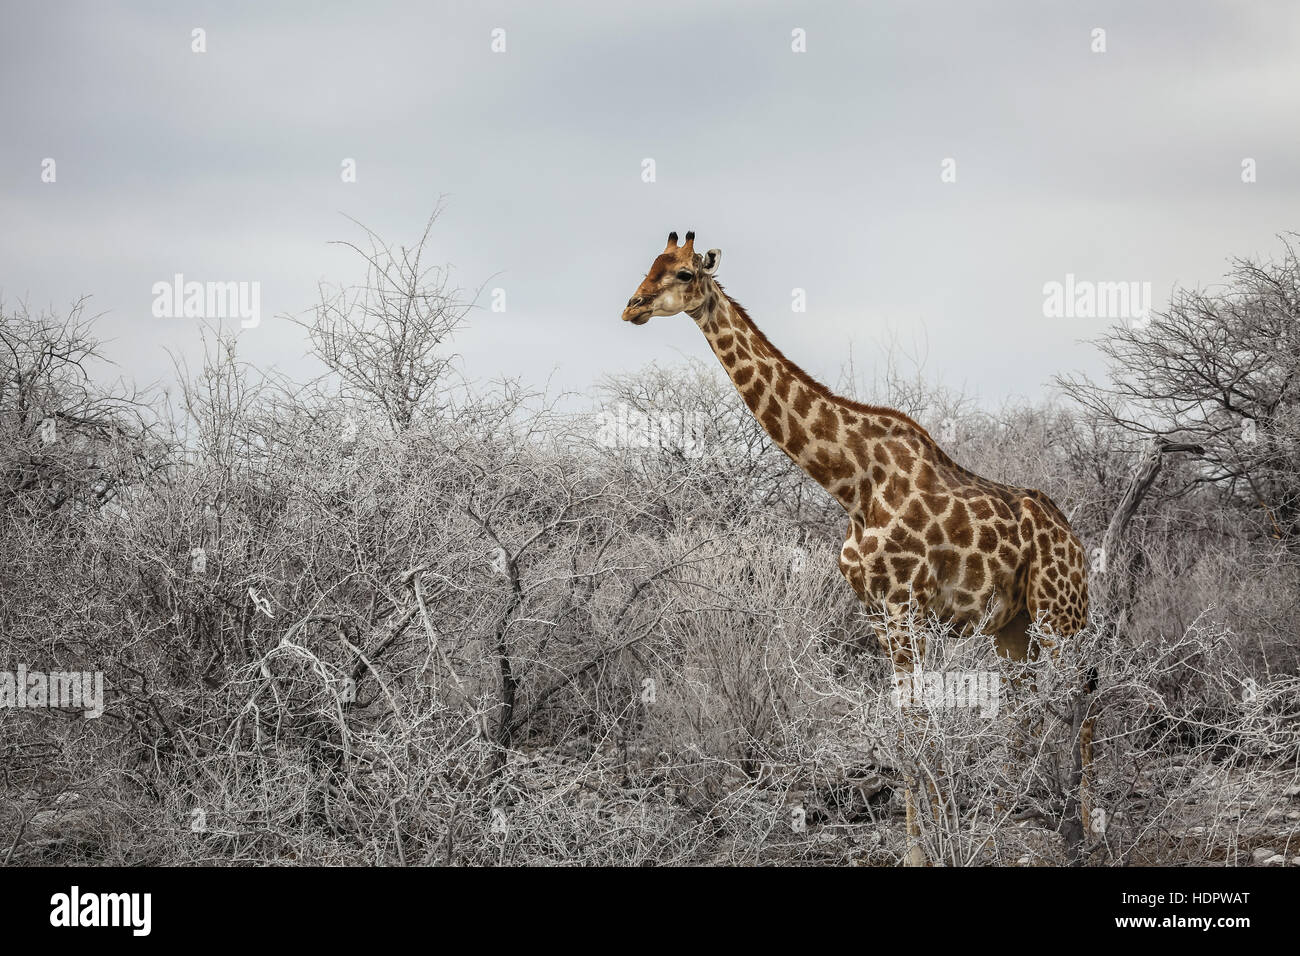 Full body photograph of an giraffe emerging from the buch at Etosha National Park, Namibia Stock Photo